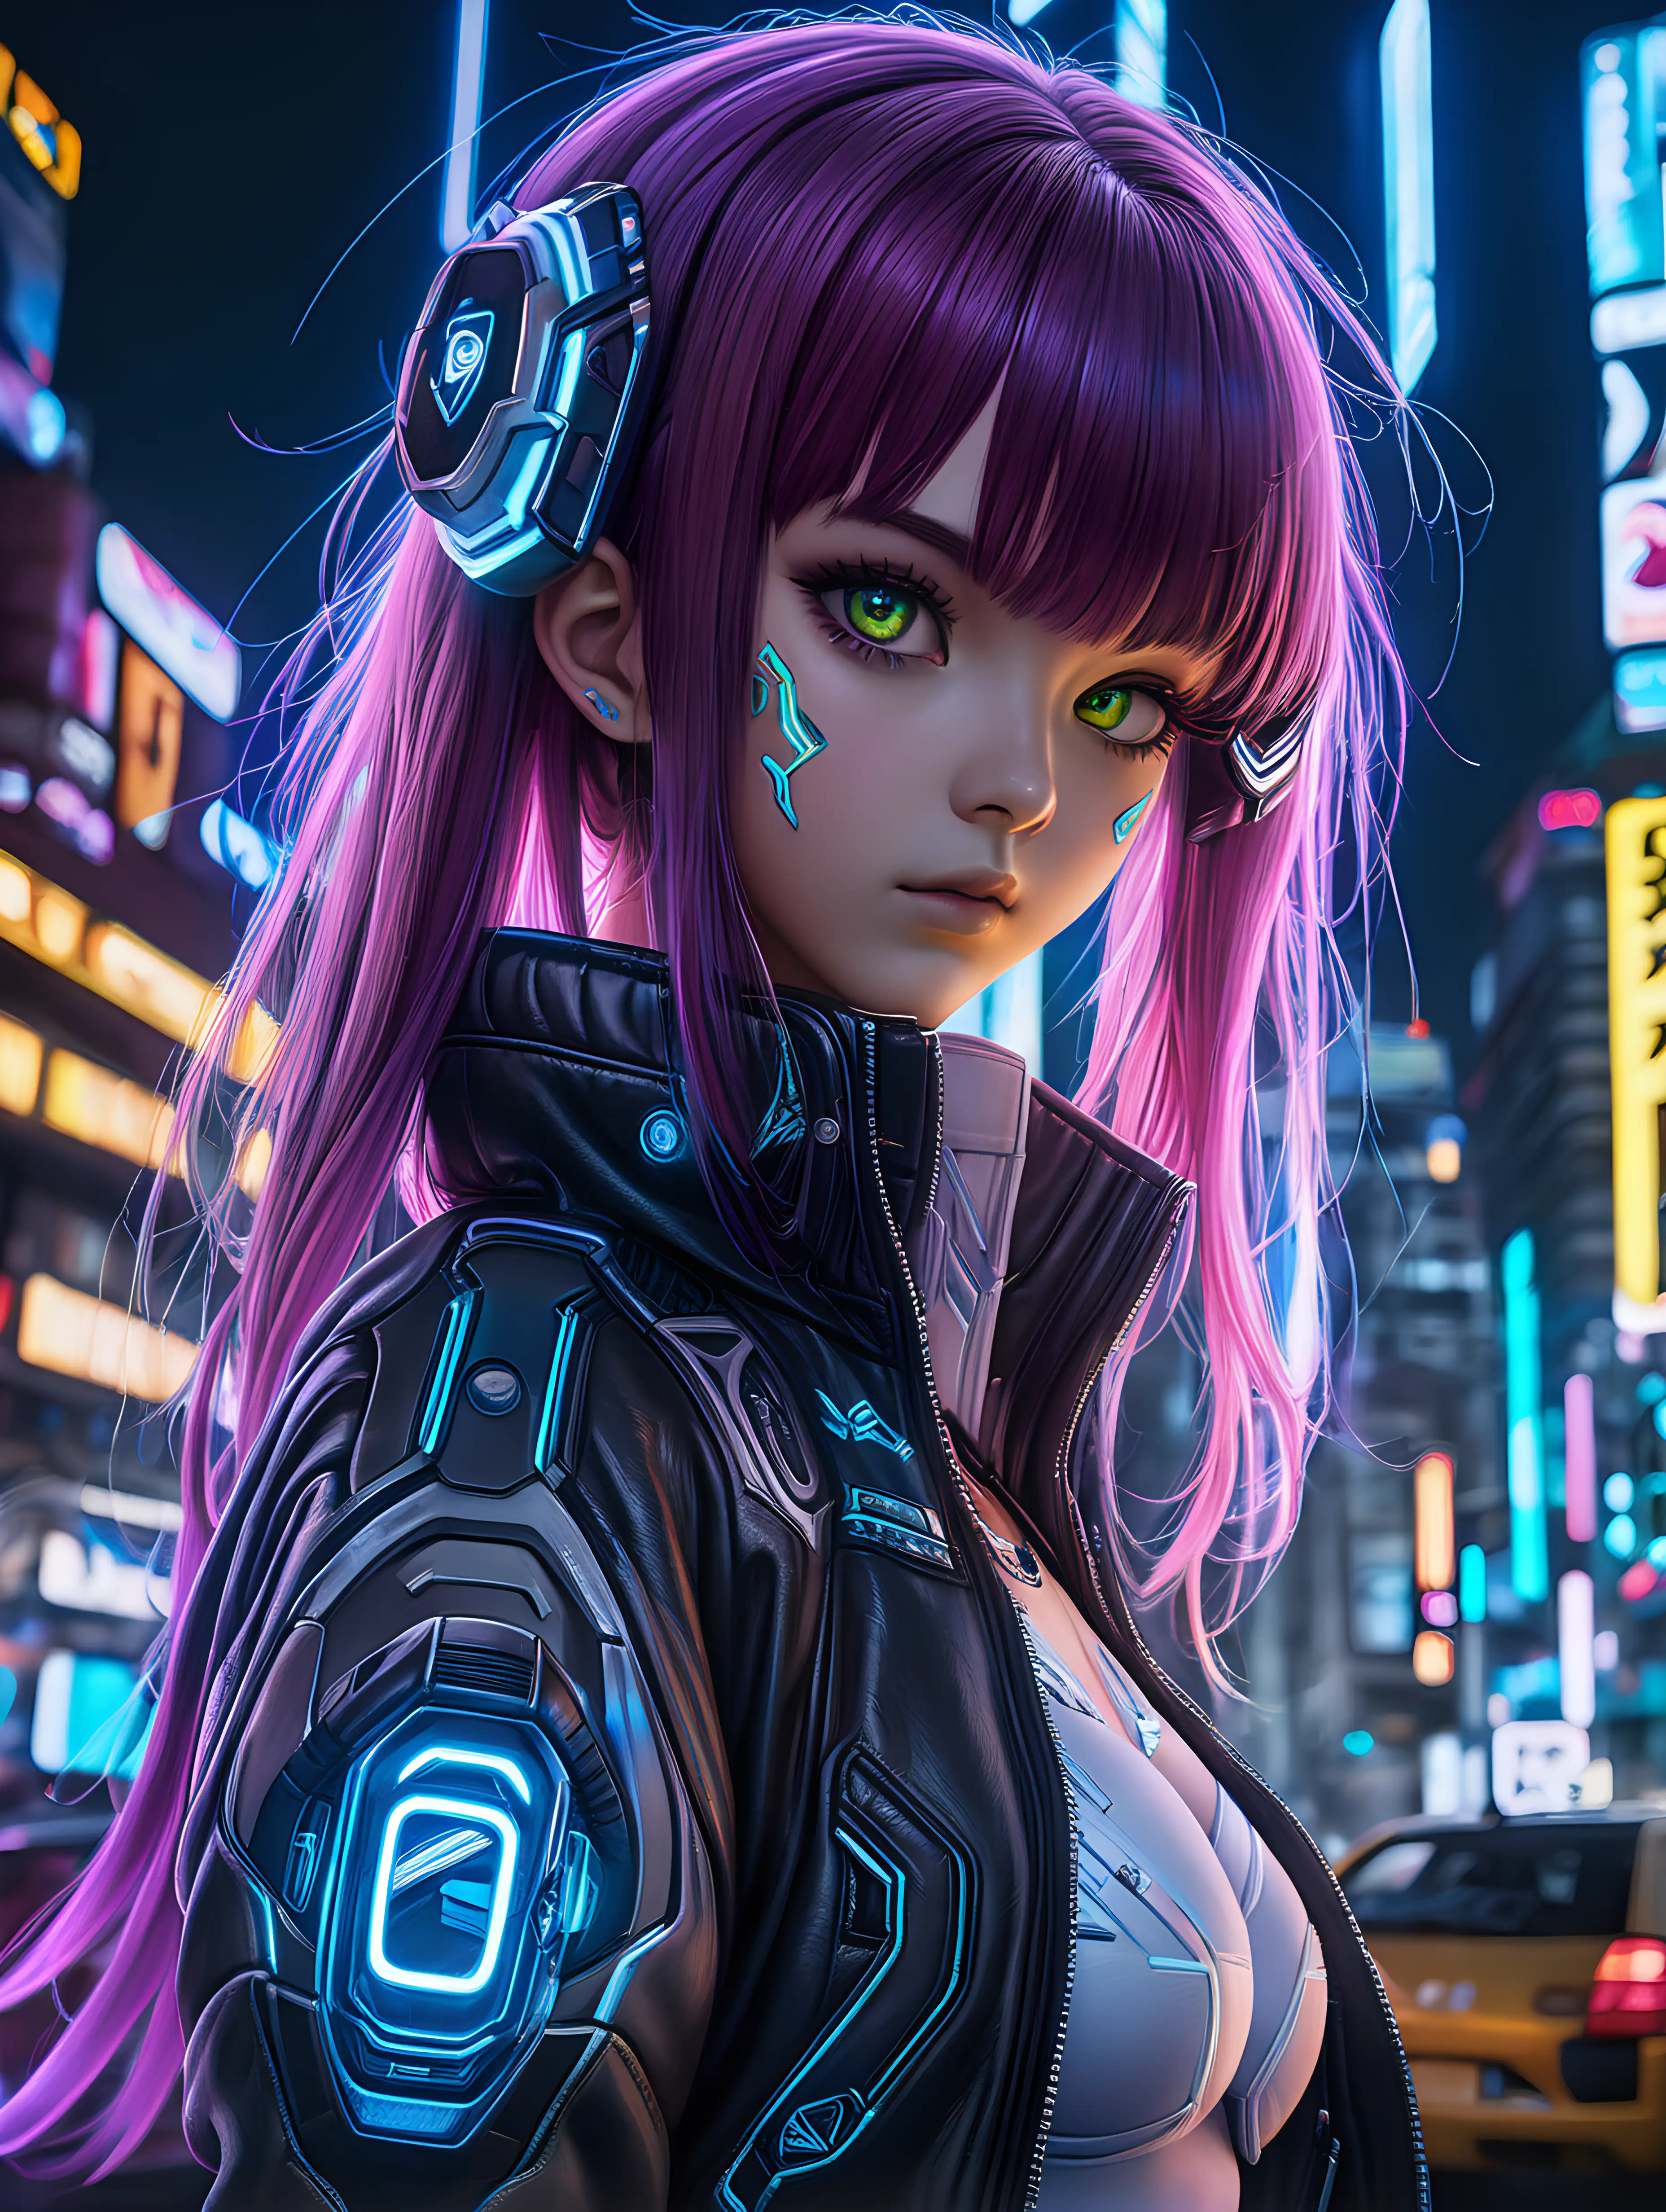 Wanted Dead's 2022 has retro-tech and a cyberpunk anime aesthetic